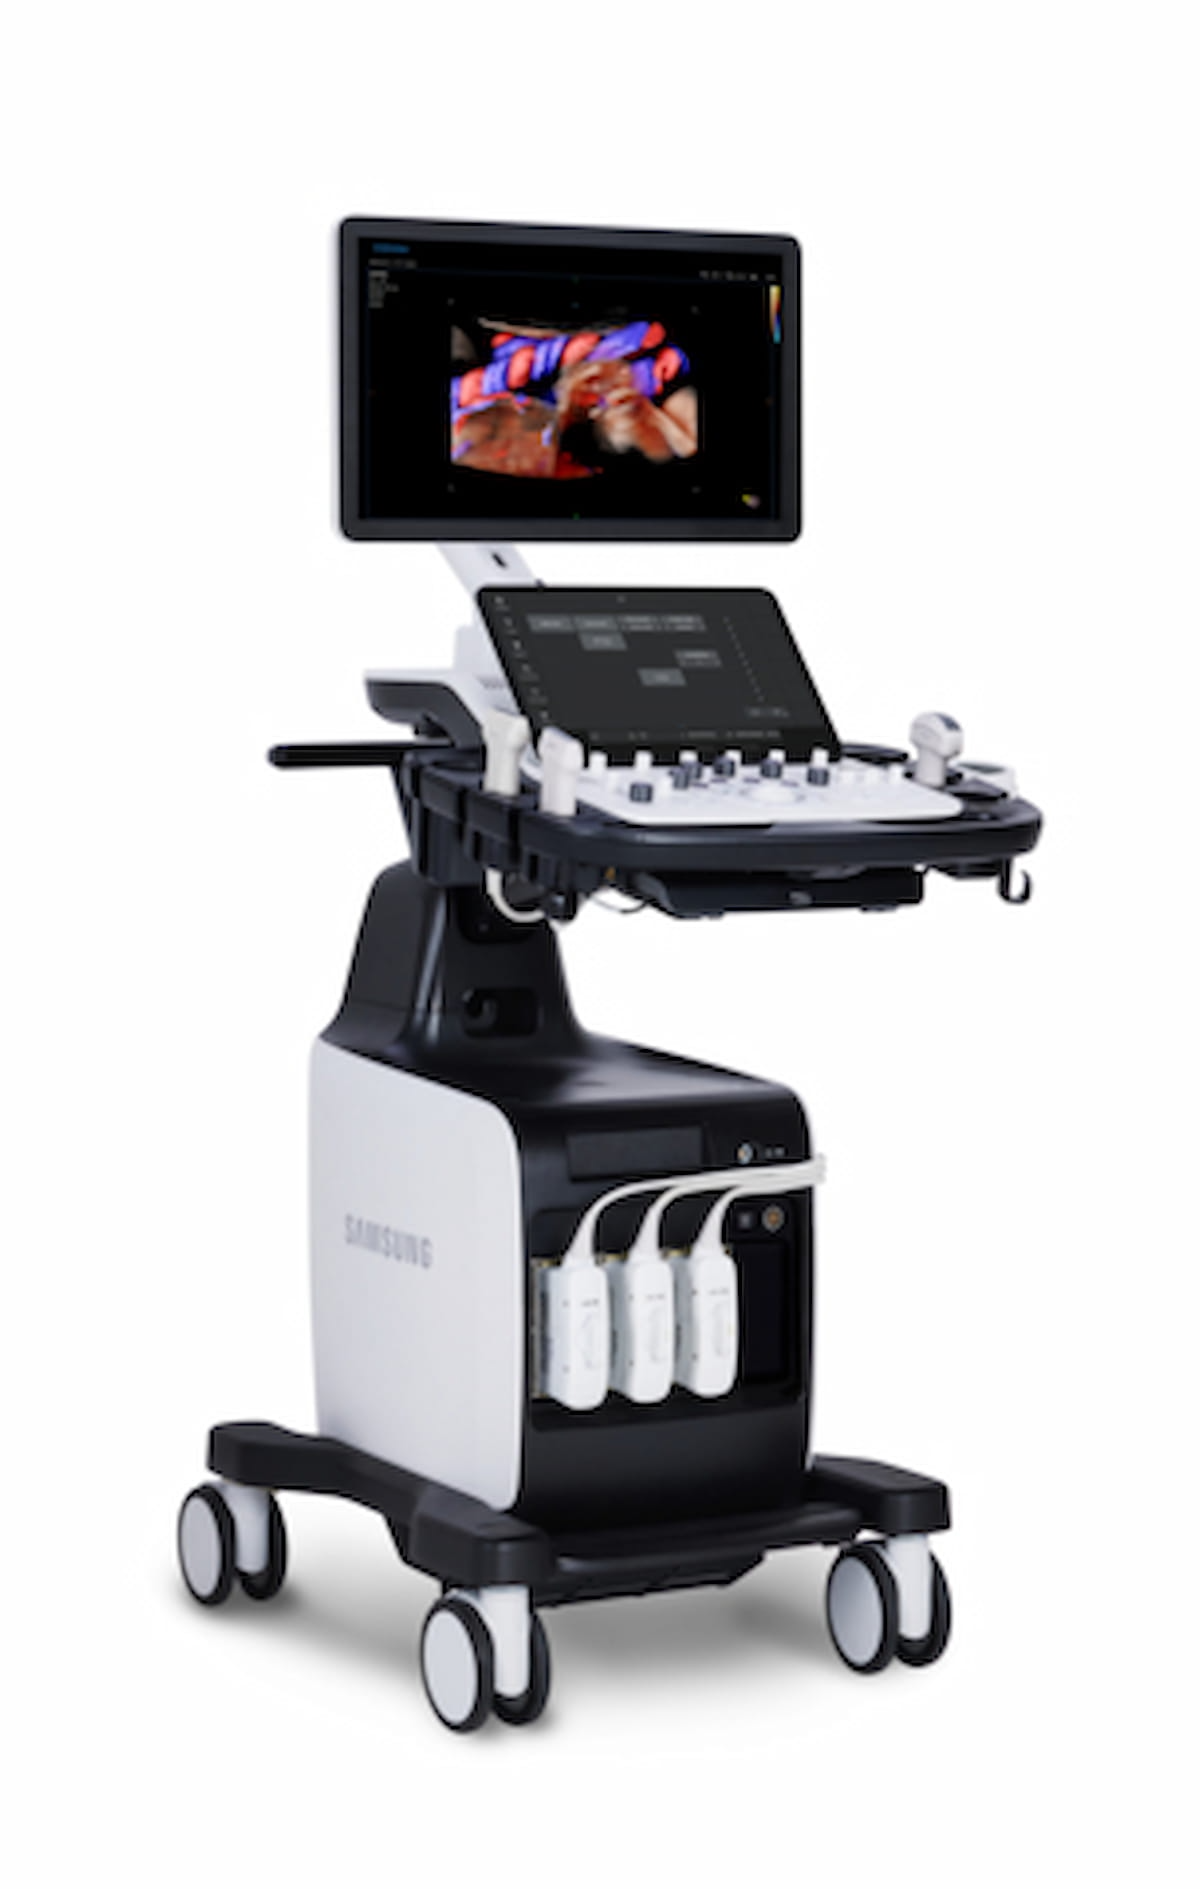 Samsung Debuts New Ultrasound Modality Geared to Women’s Health and Urology